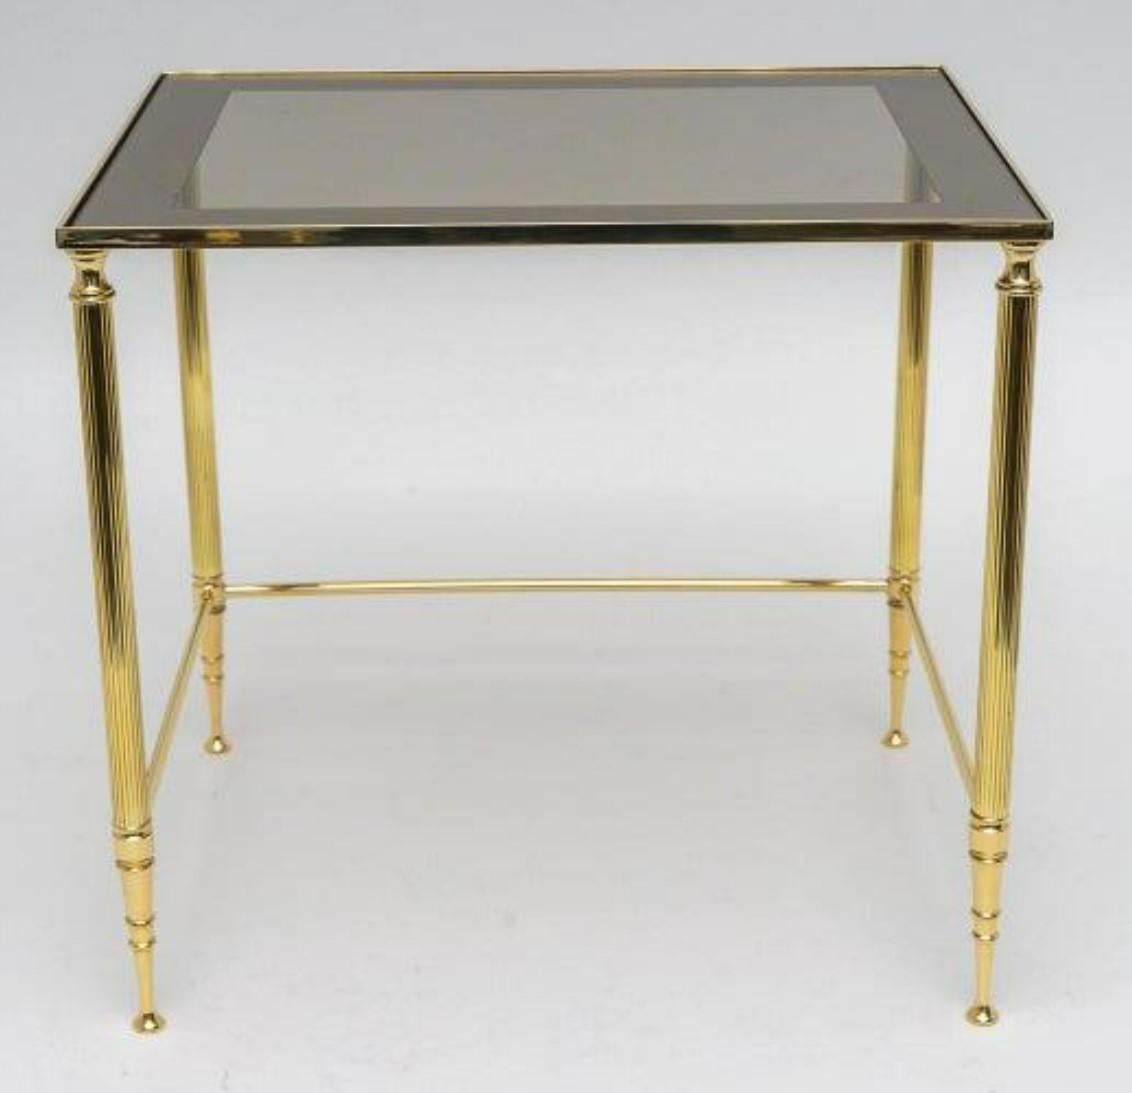 Vintage Hollywood Regency Brass & Glass Nesting Tables attr. to Maison Jansen In Good Condition For Sale In Southampton, NJ